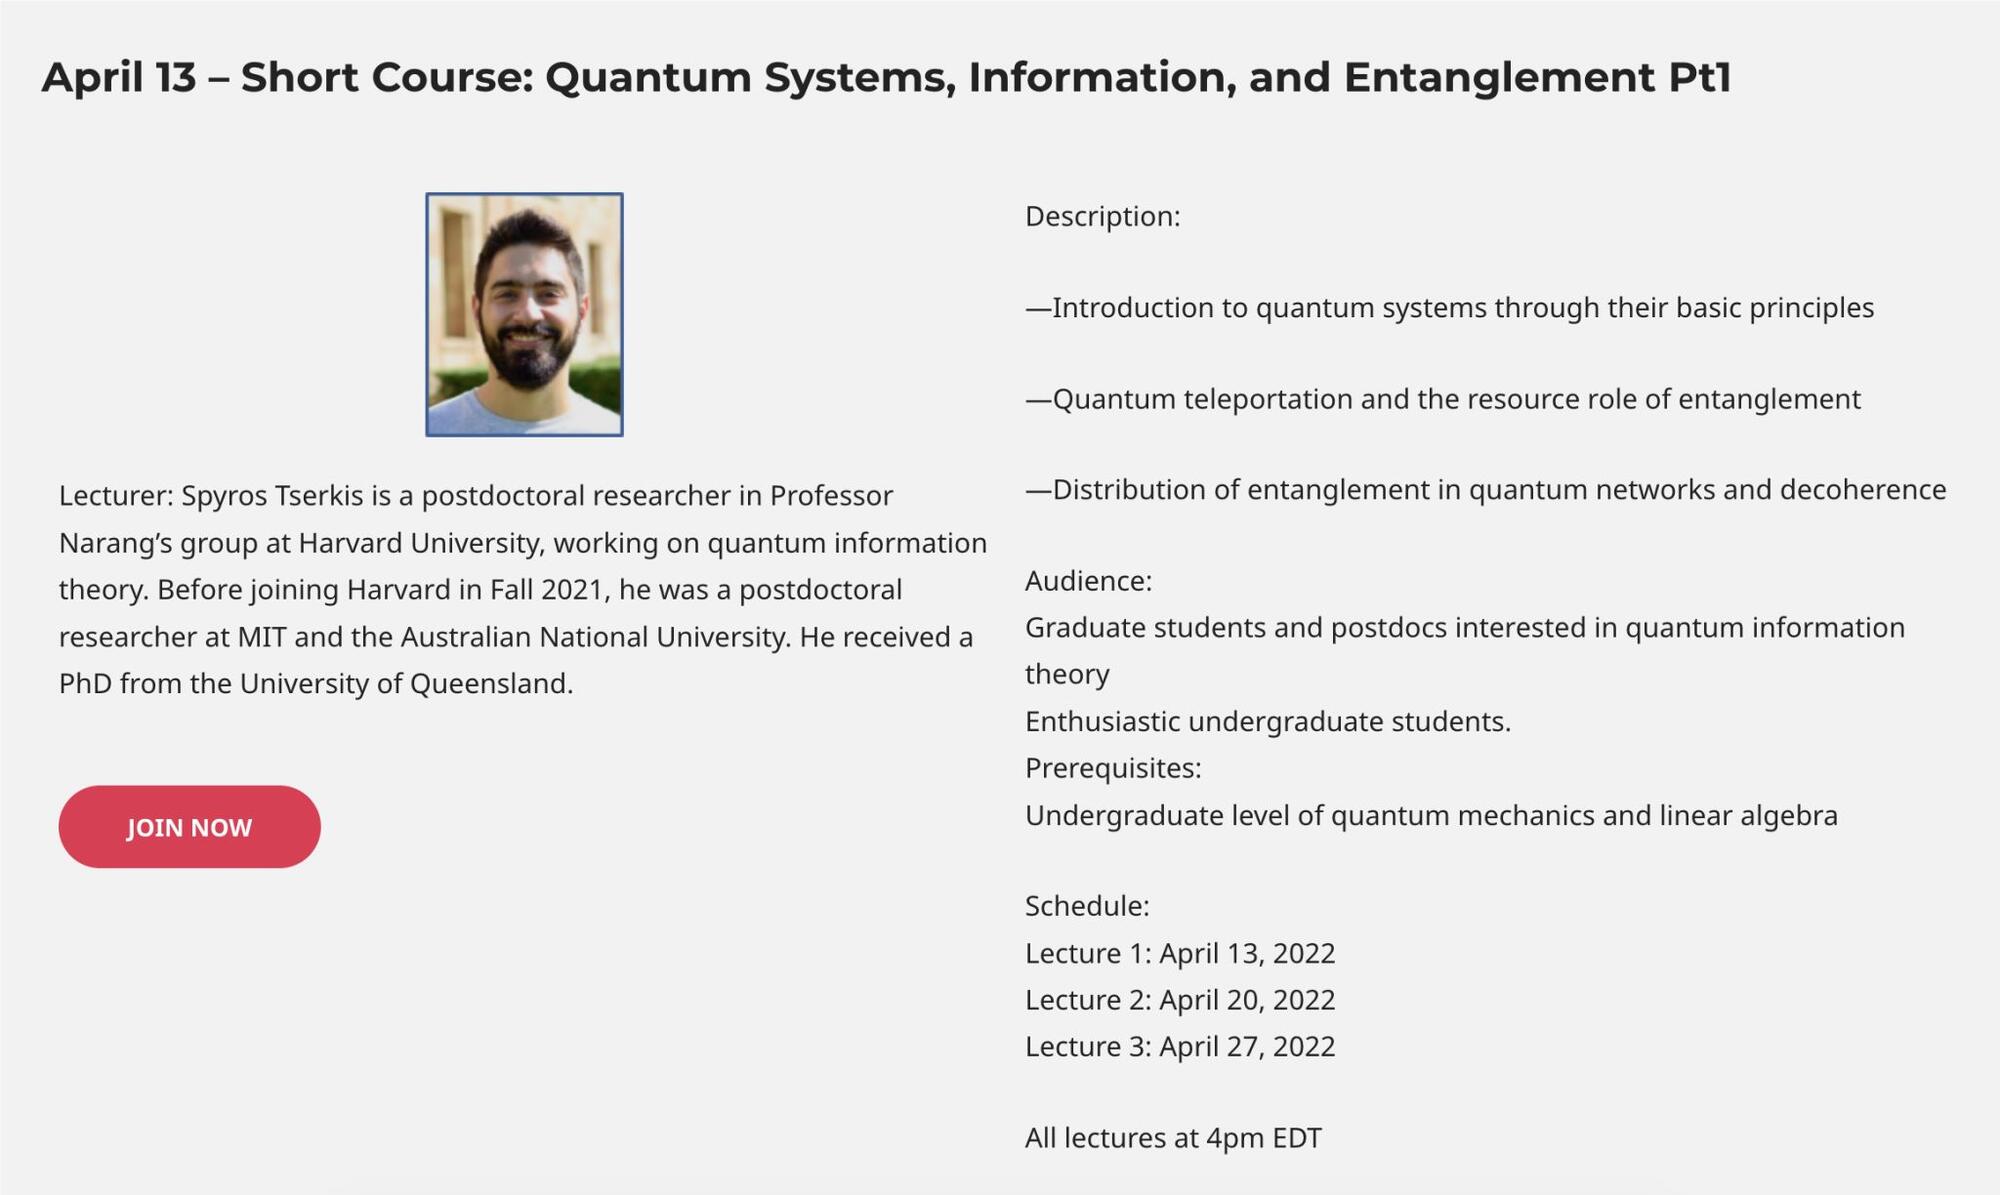 Short Course on “Quantum Systems, Information, and Entanglement” by Dr. Spyros Tserkis